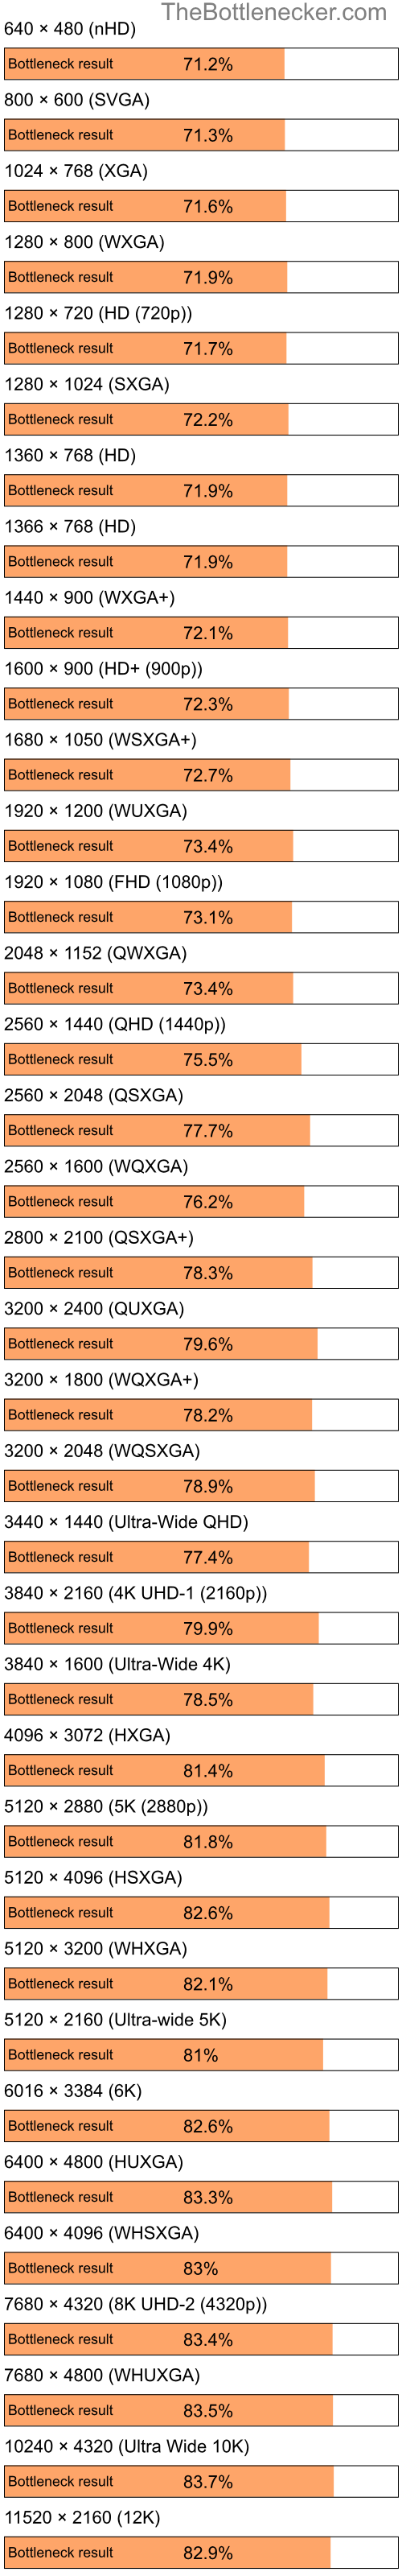 Bottleneck results by resolution for Intel Pentium 4 and AMD Mobility Radeon X1600 in Graphic Card Intense Tasks